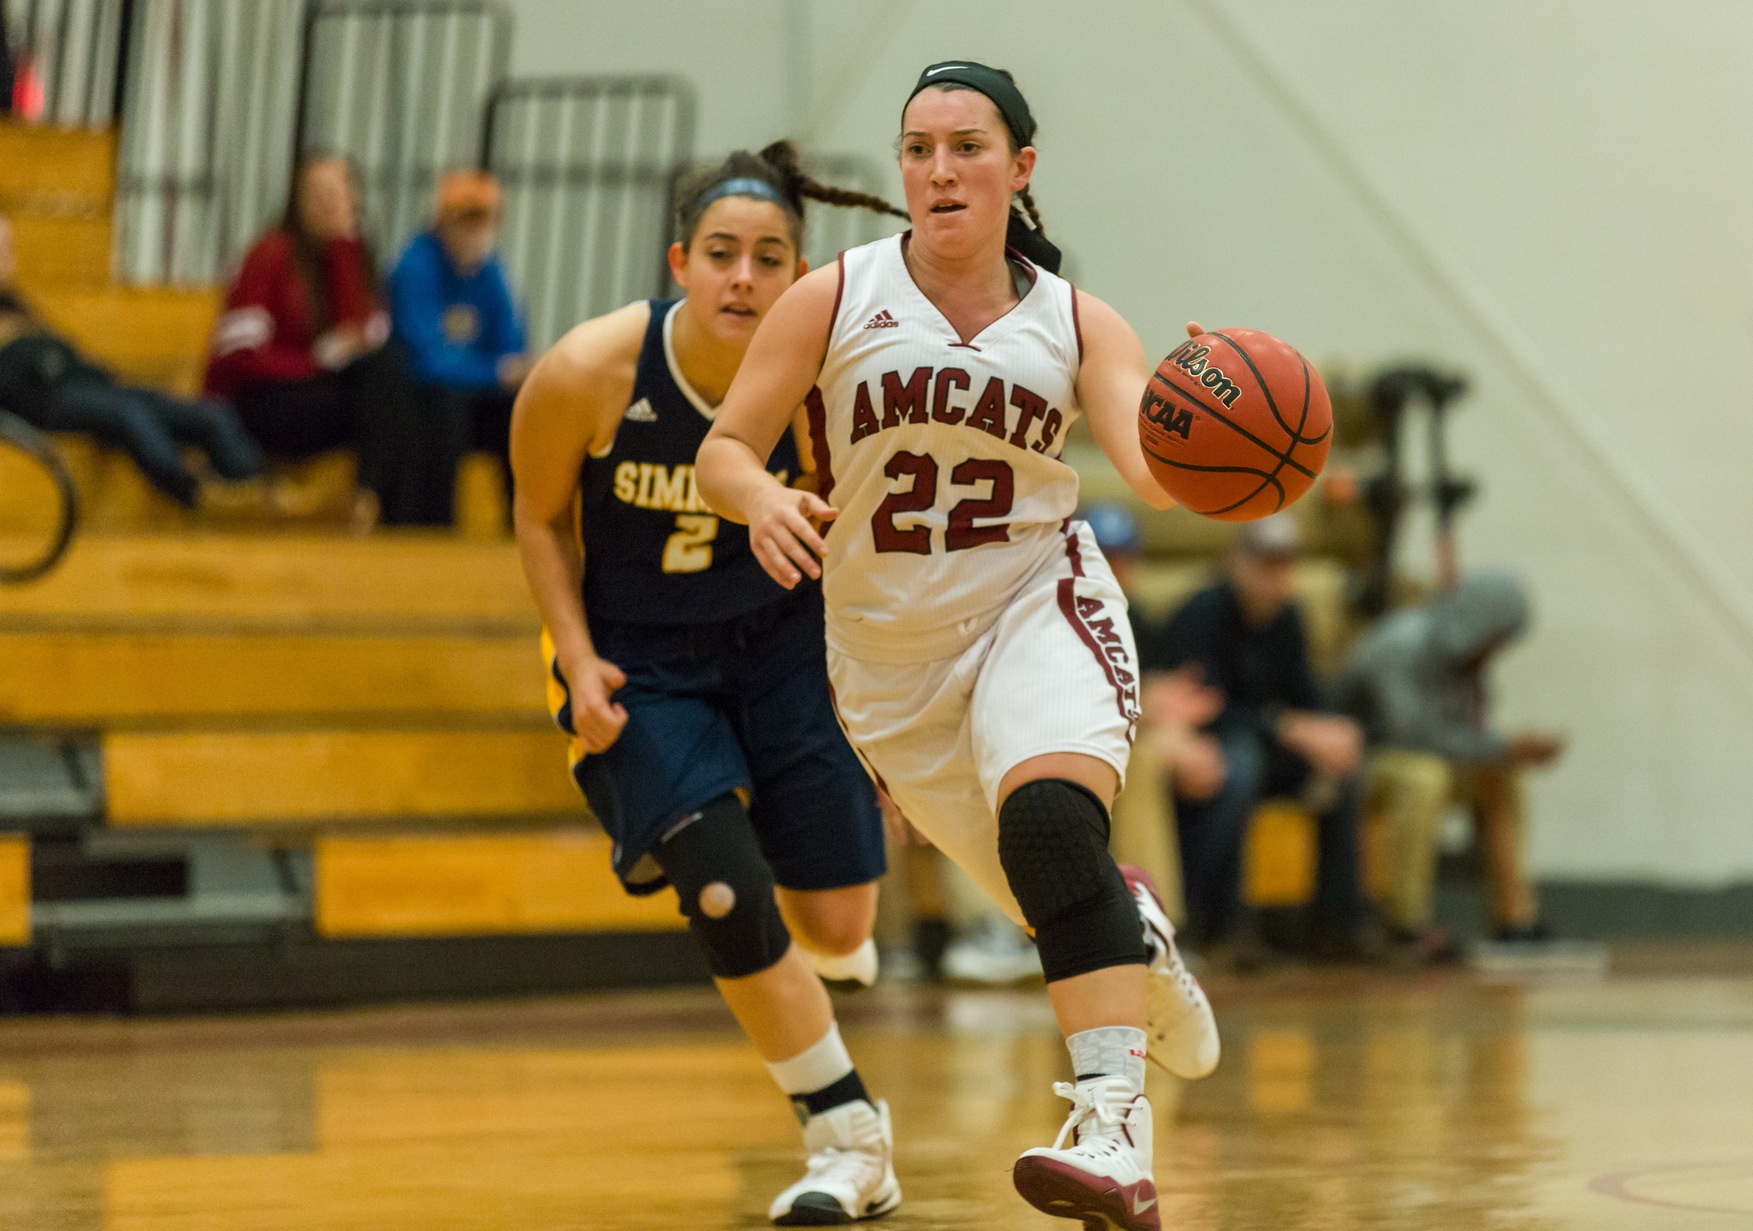 Women's Basketball Drops to Monks, 85-64